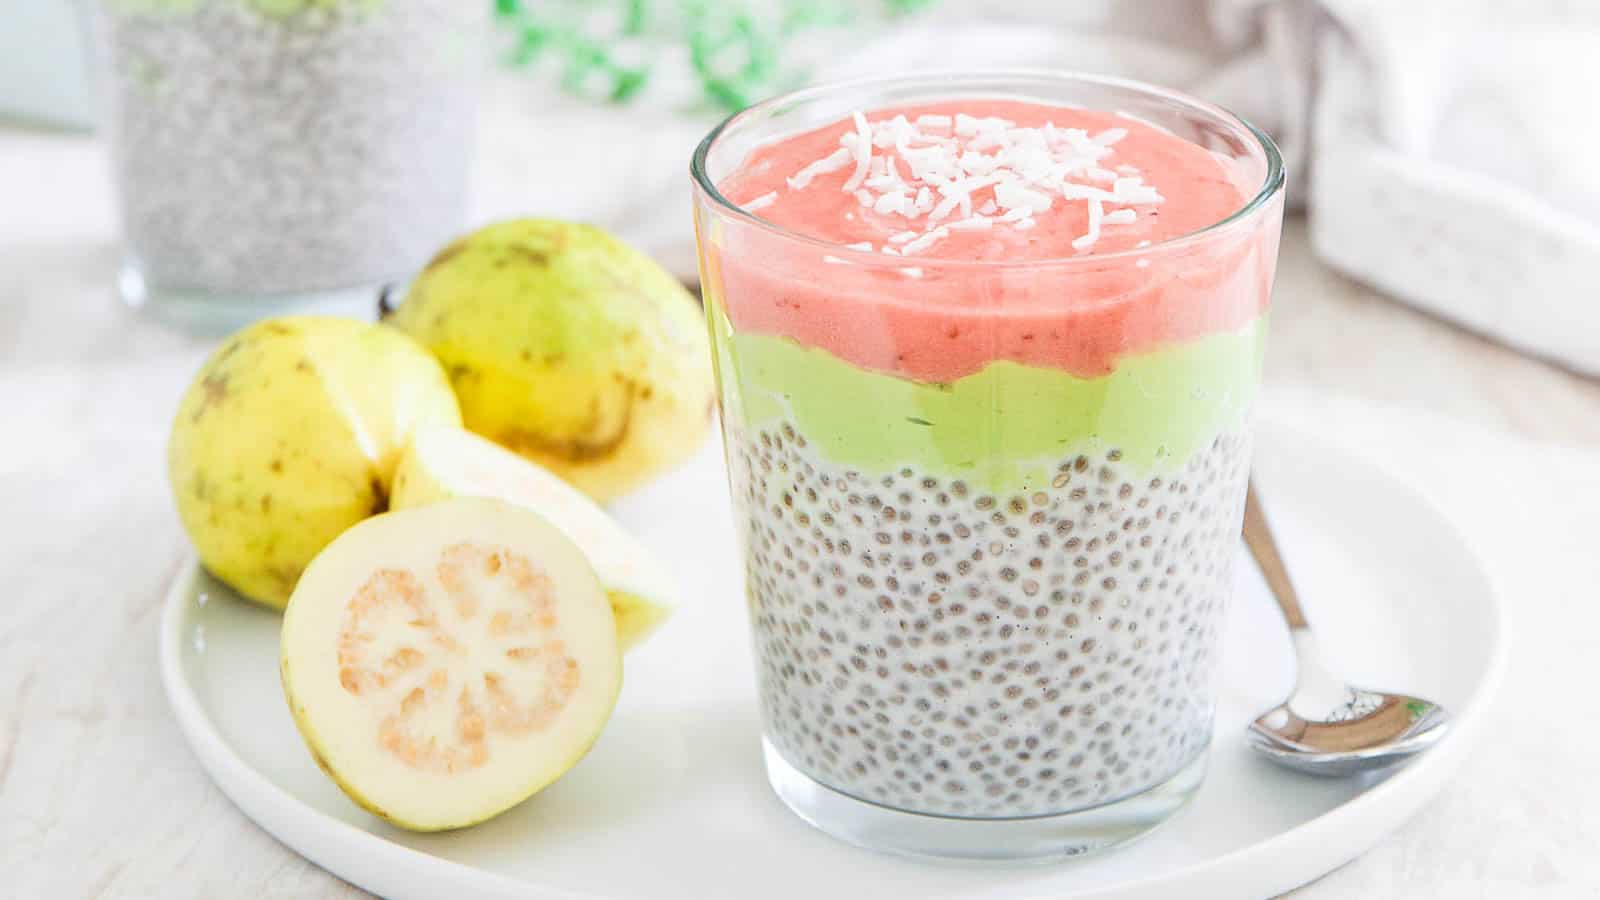 Two glasses of chia pudding on a plate.